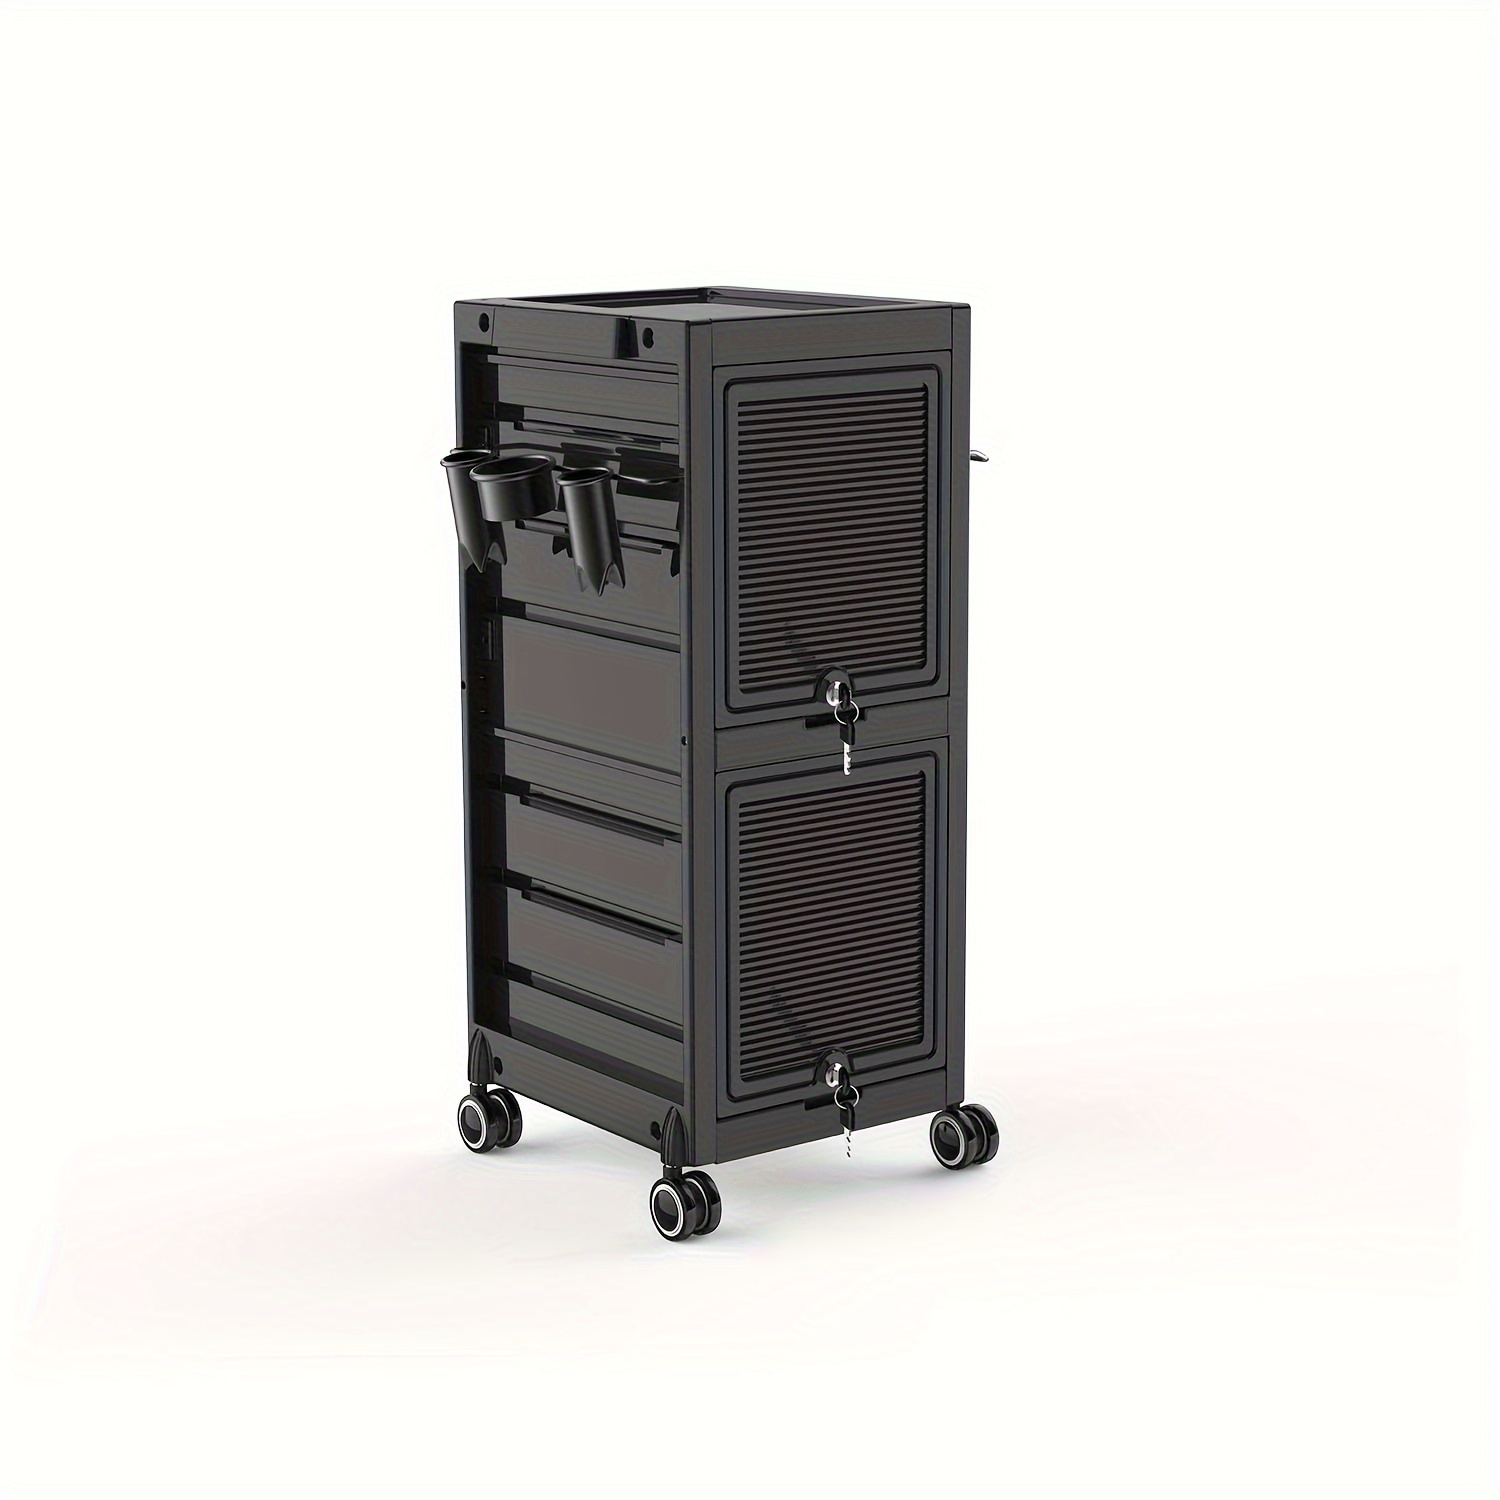 

Hufy Salon Trolley Cart - Lockable With 2 Keys, 6 Trays, 3 Heat Resistant Holders, Rolling Wheels, & Spa Beauty Tool Storage For Hair Stylist Stations